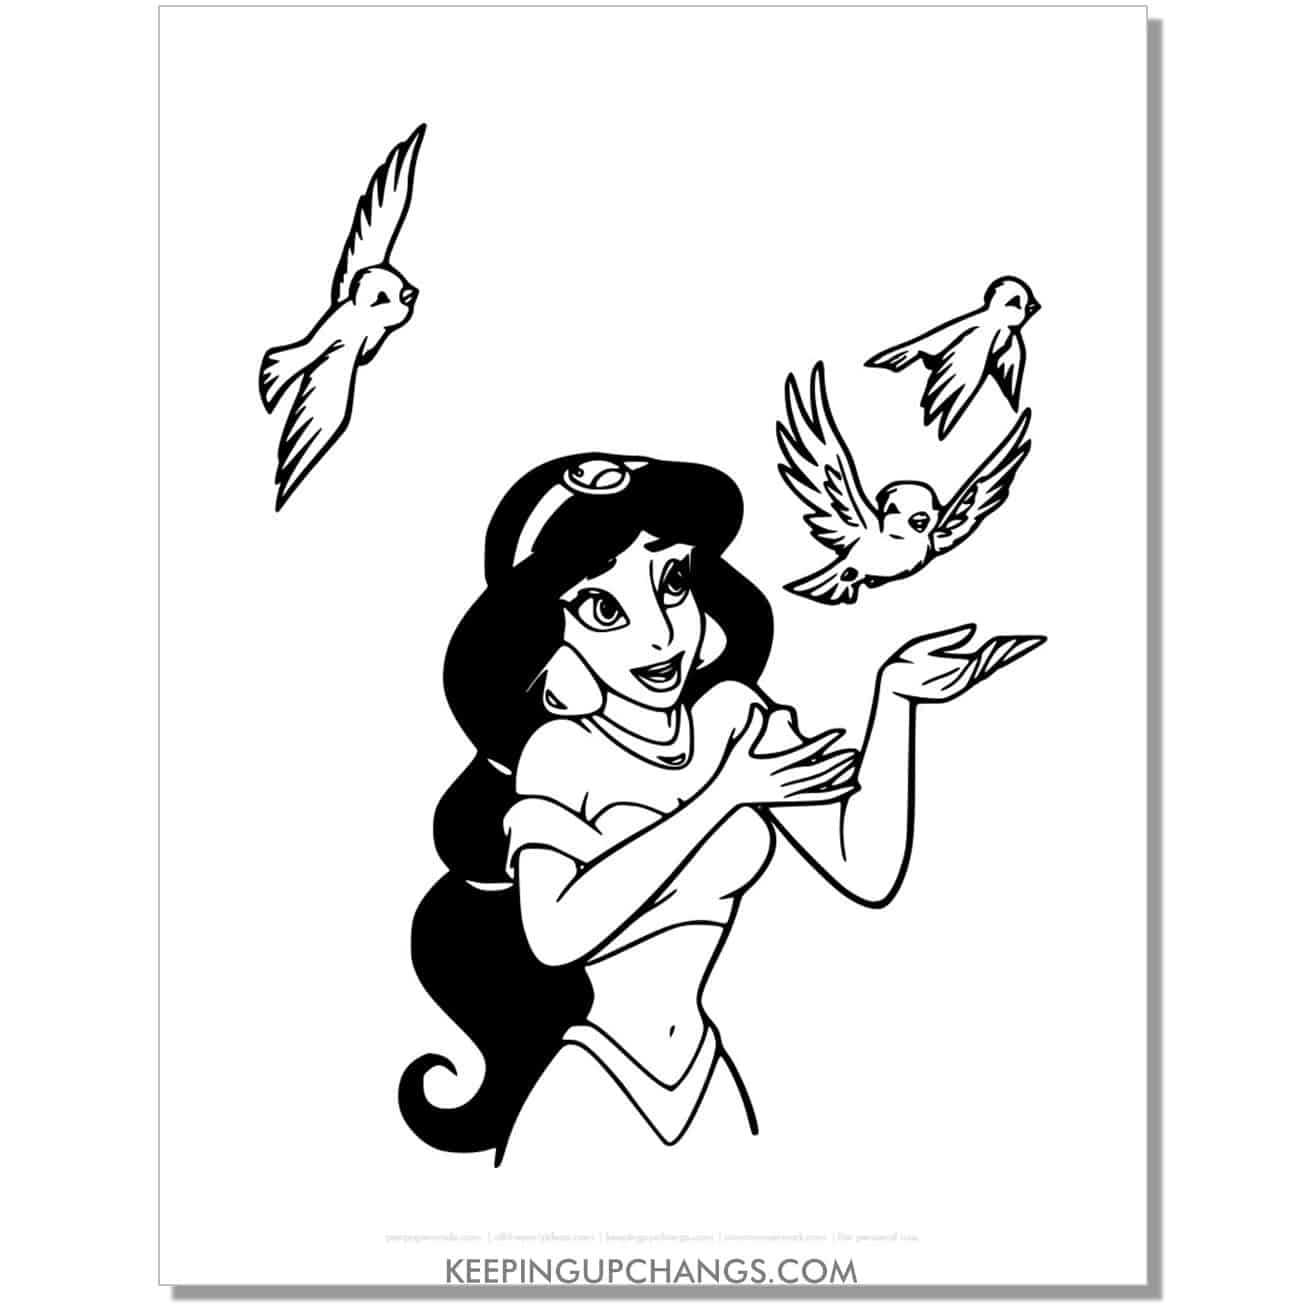 jasmine playing with birds coloring page, sheet.